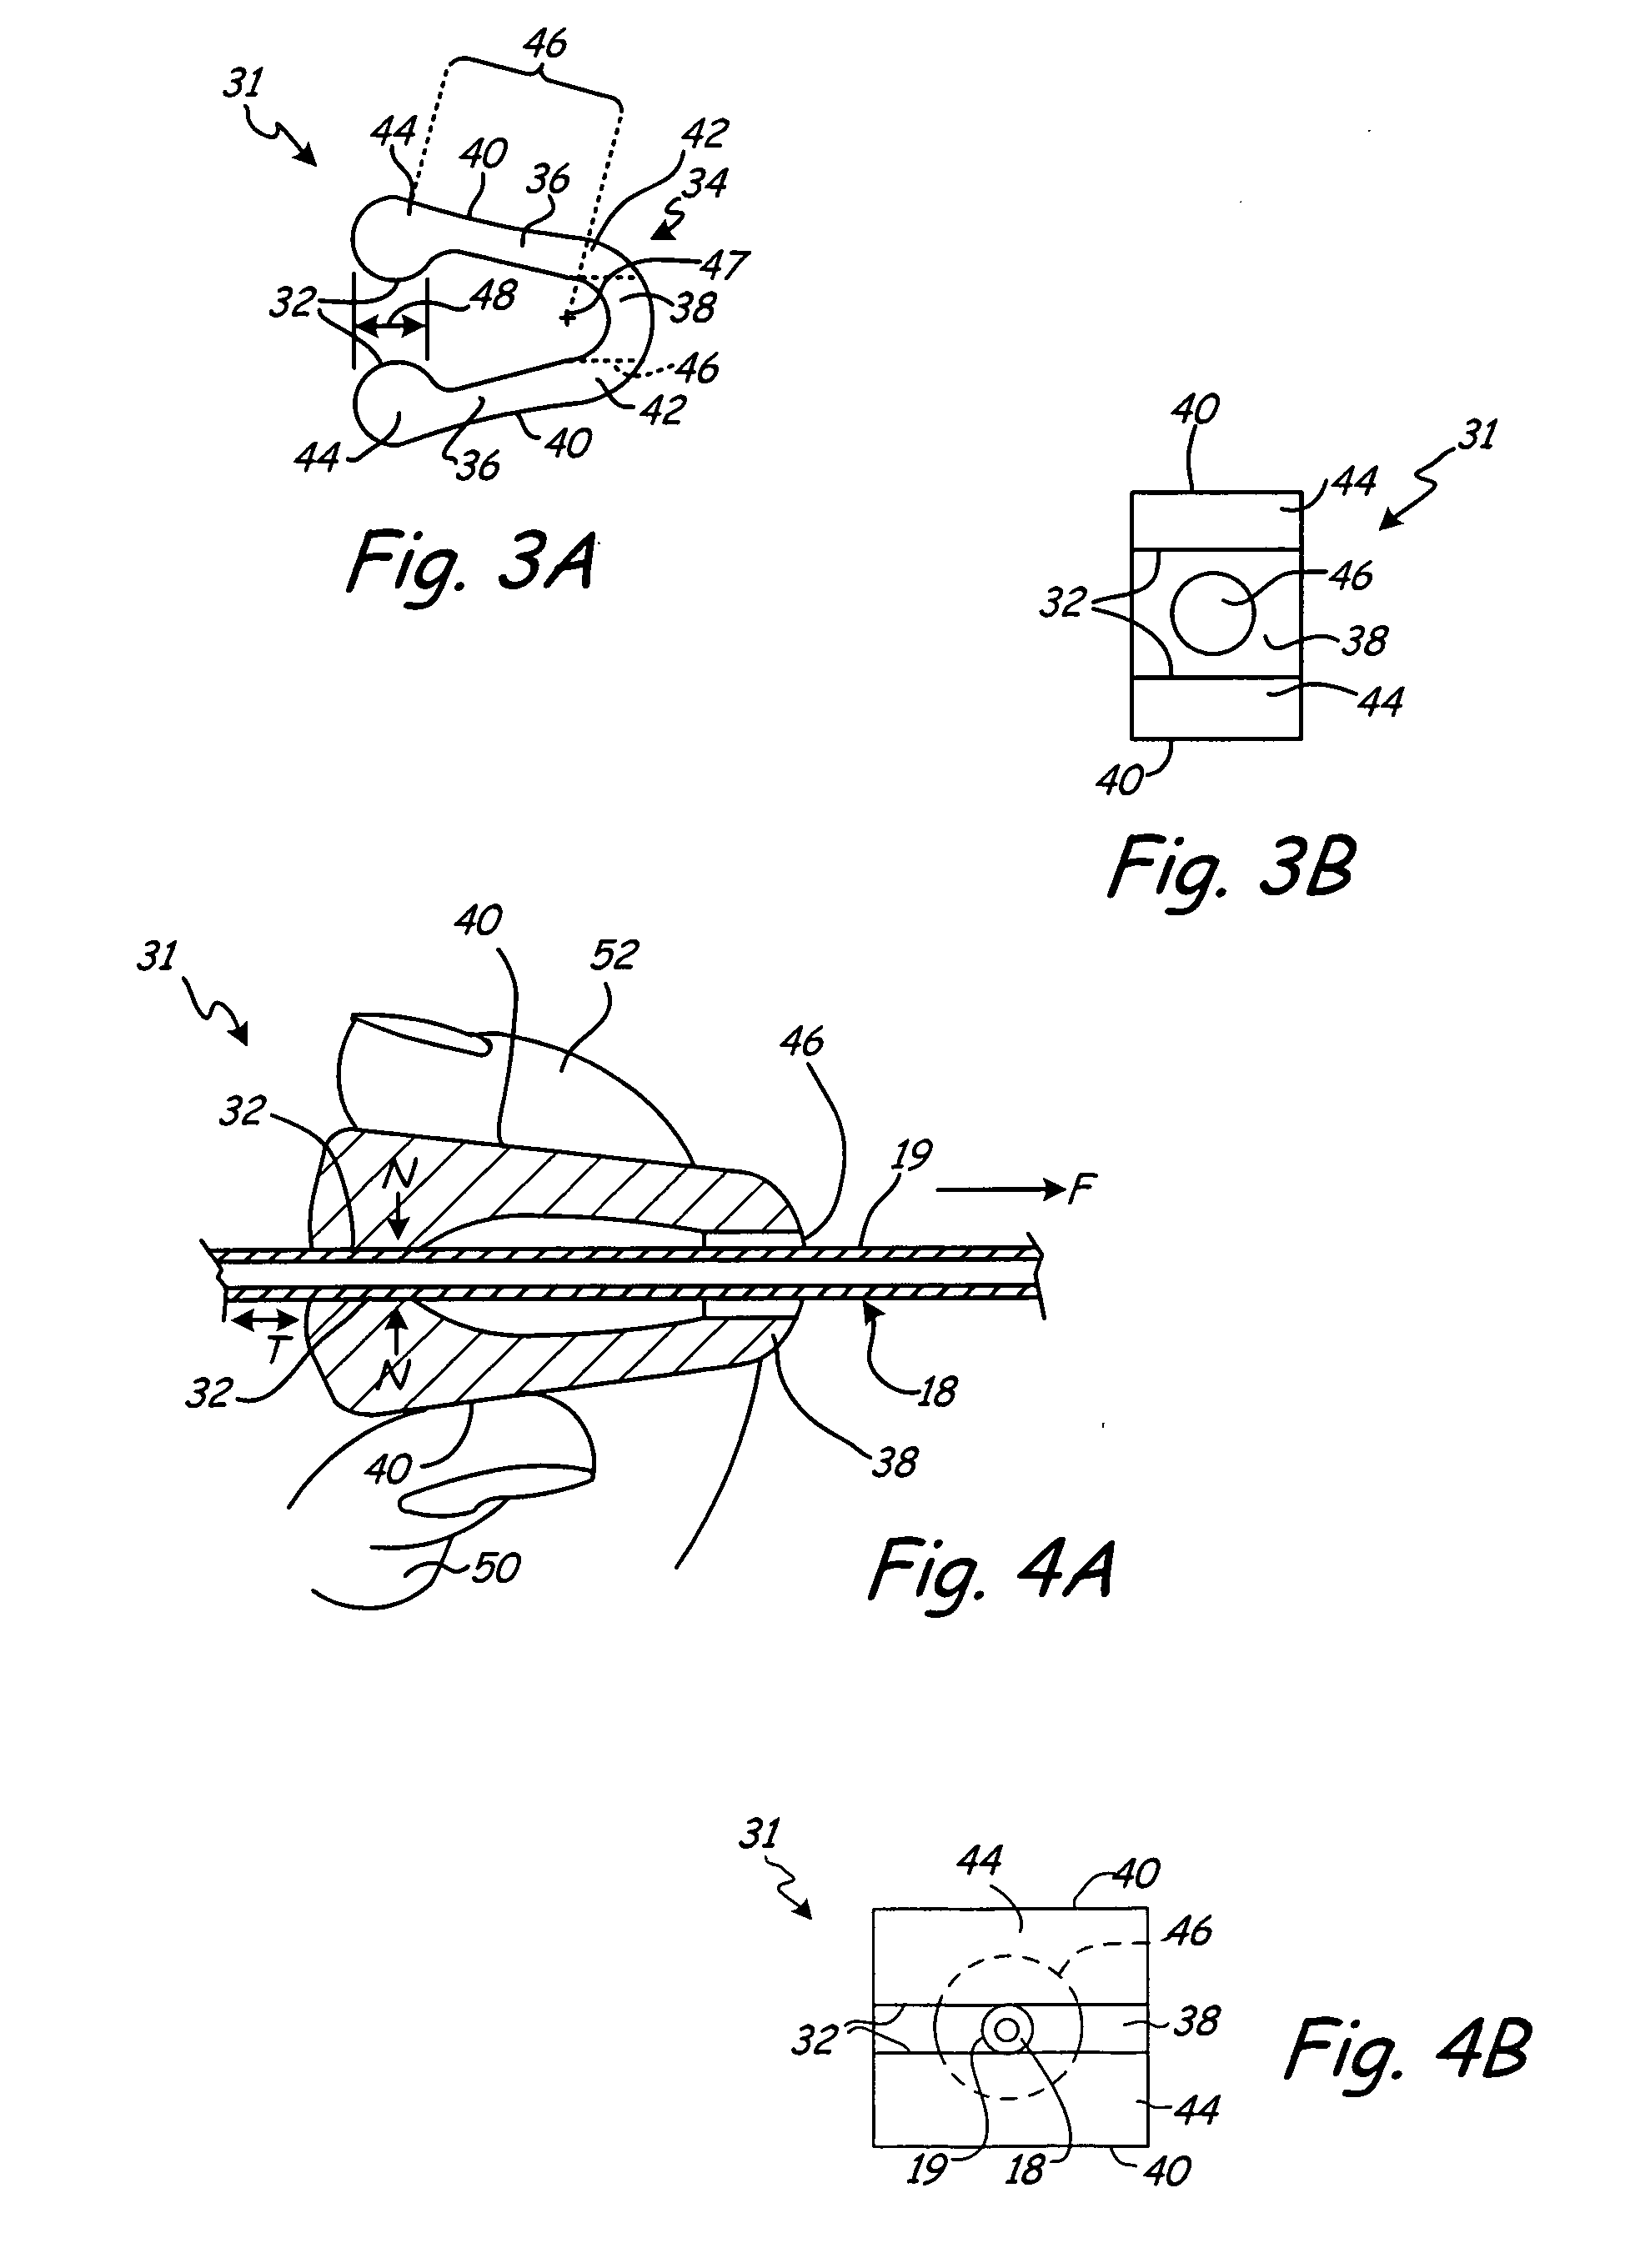 Wound drain removal device